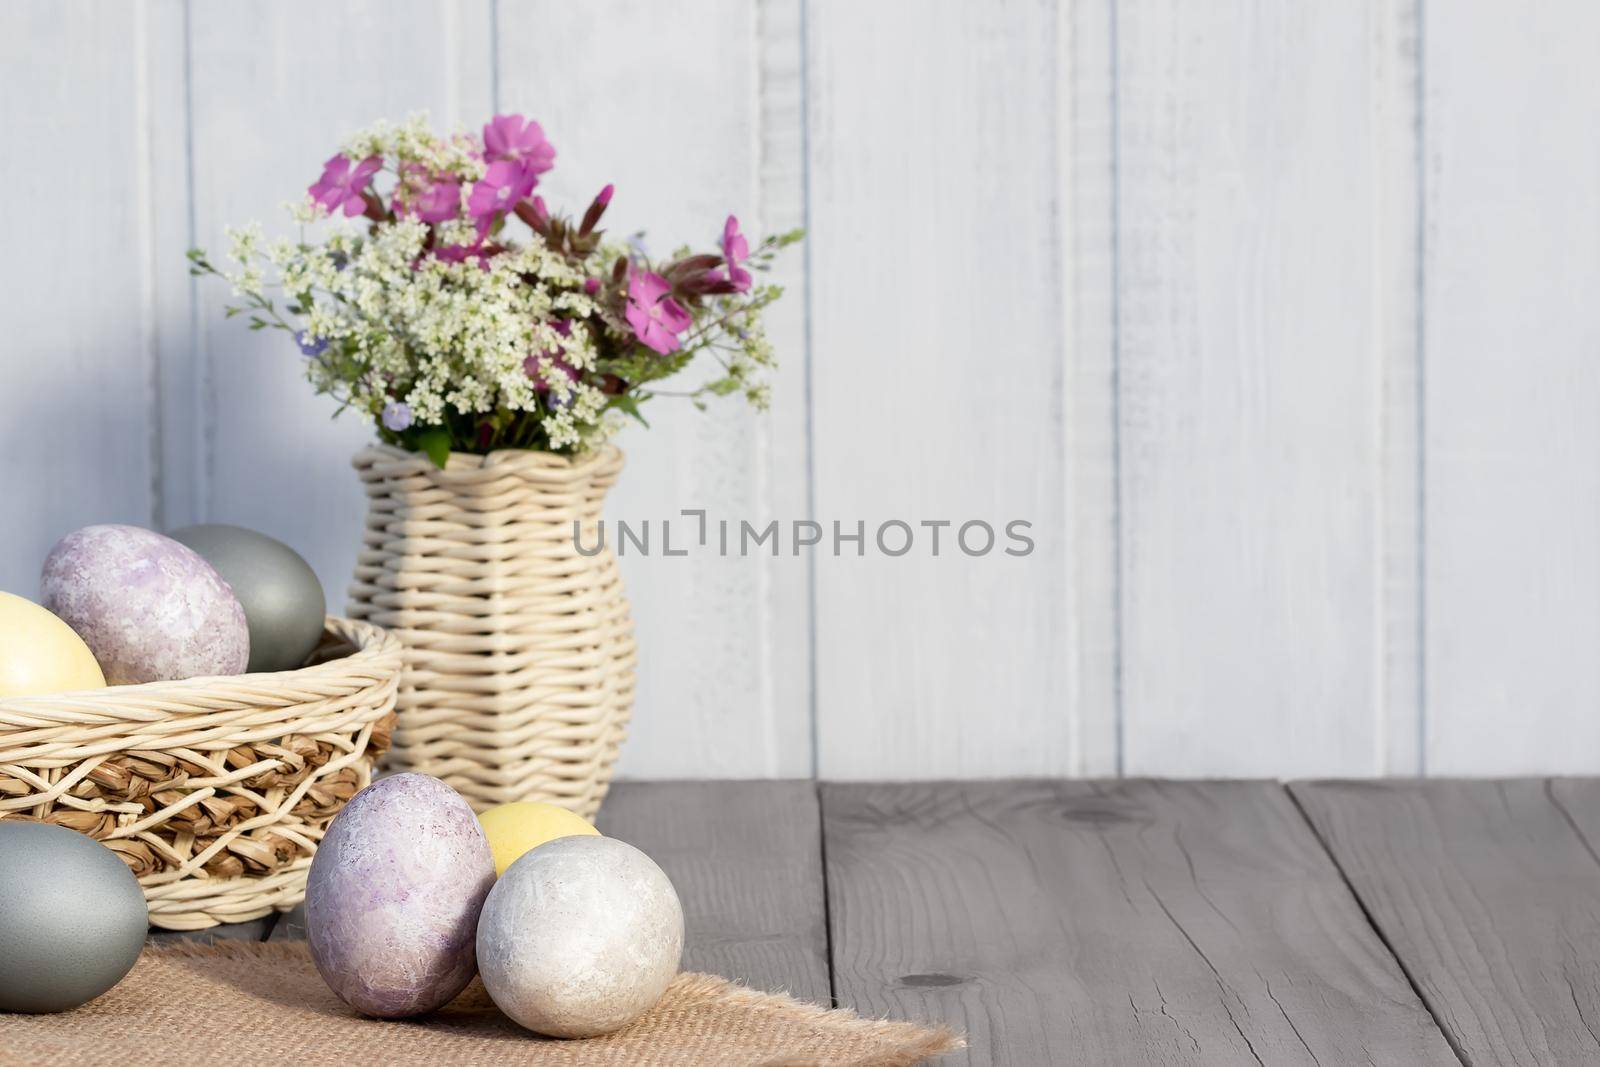 Easter composition - several eggs painted with natural dyes and wildflowers in a vase.